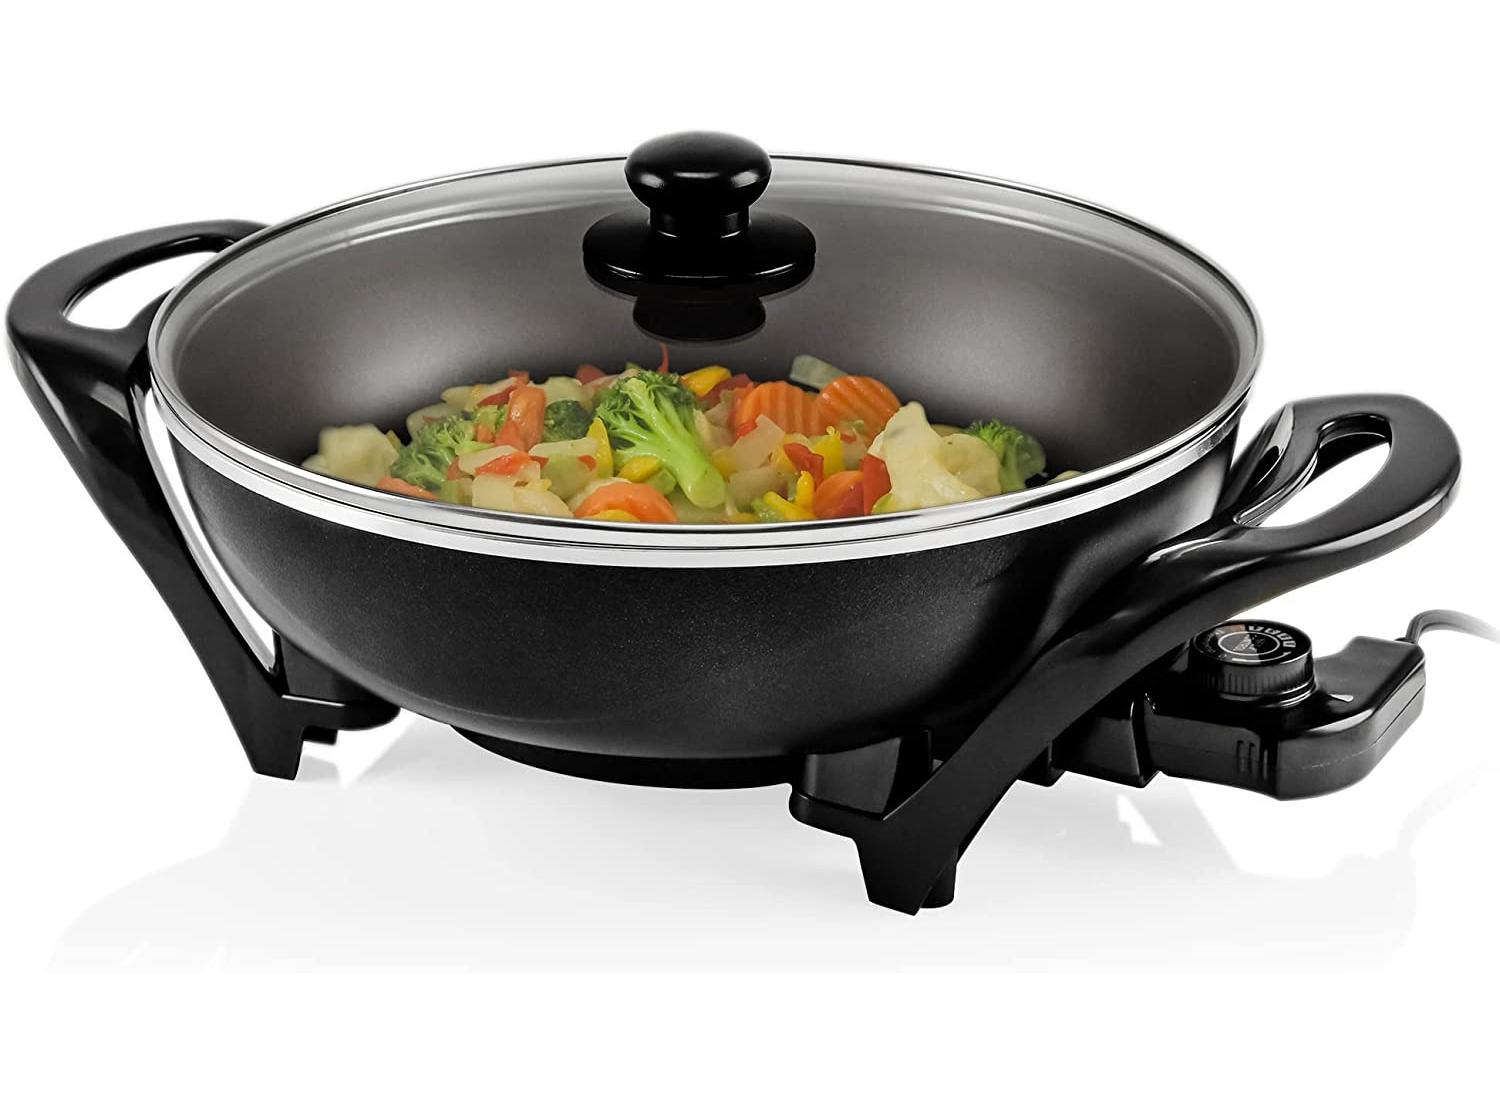 Presto Stainless Steel Electric Wok Review: Sizzling Results